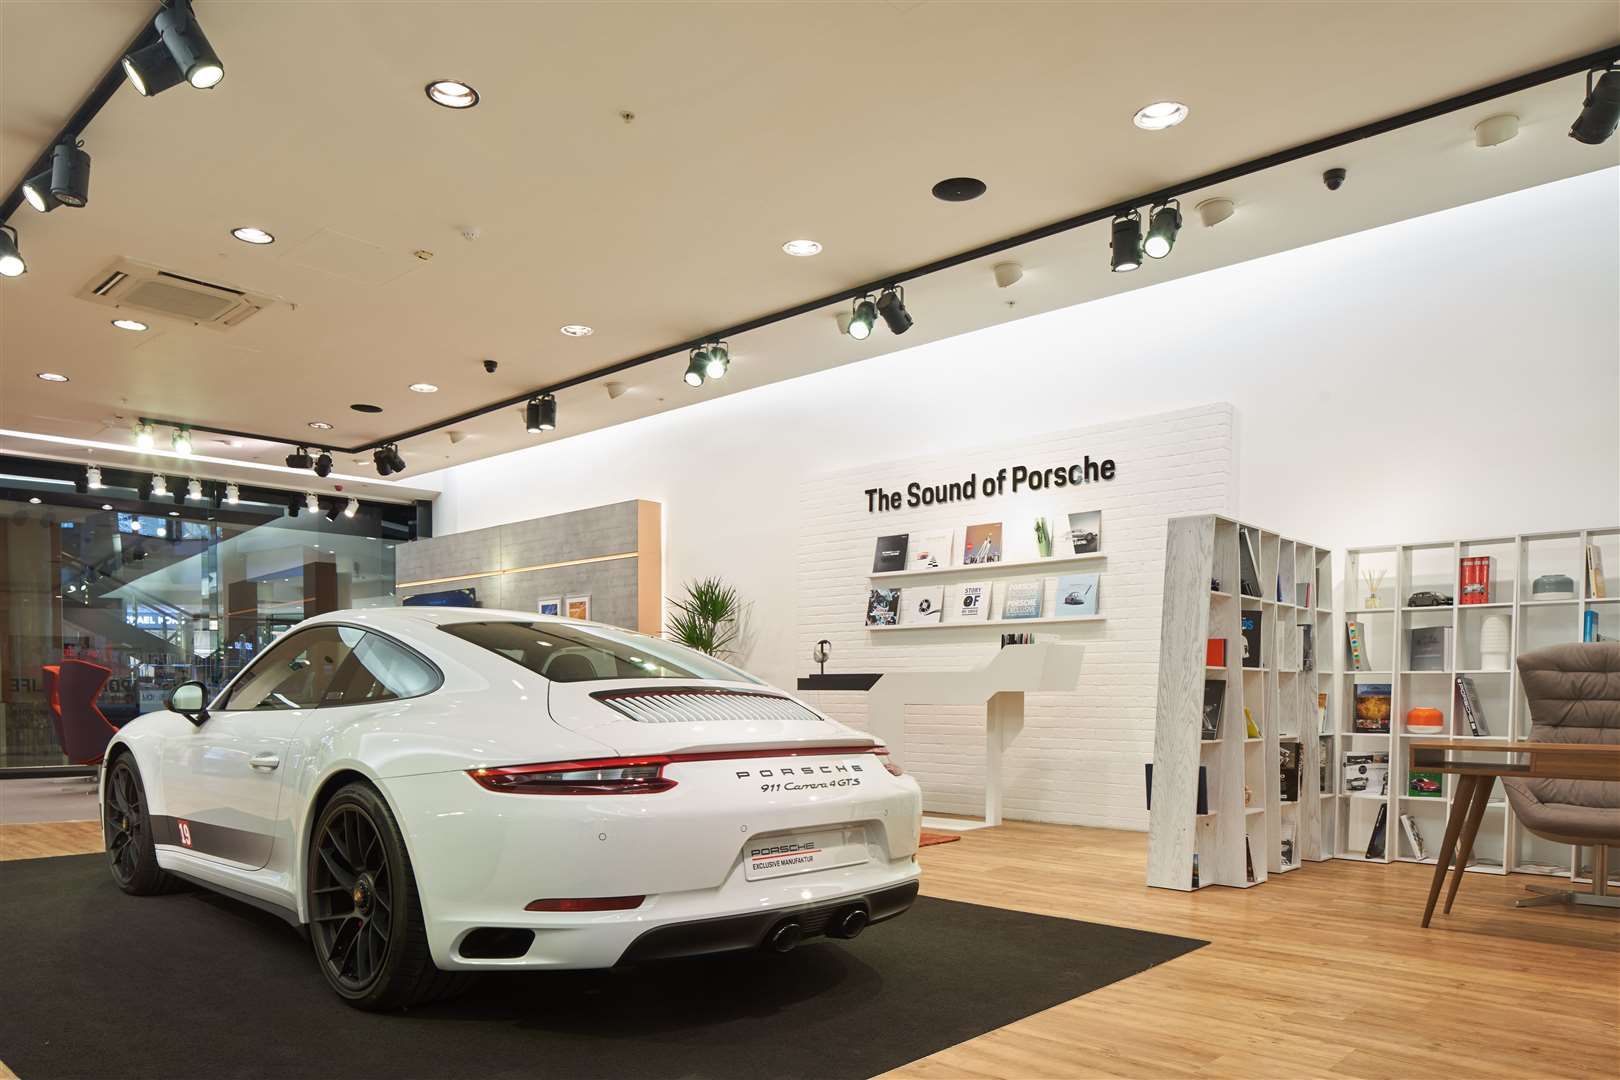 A Porsche pop-up store has opened at Bluewater